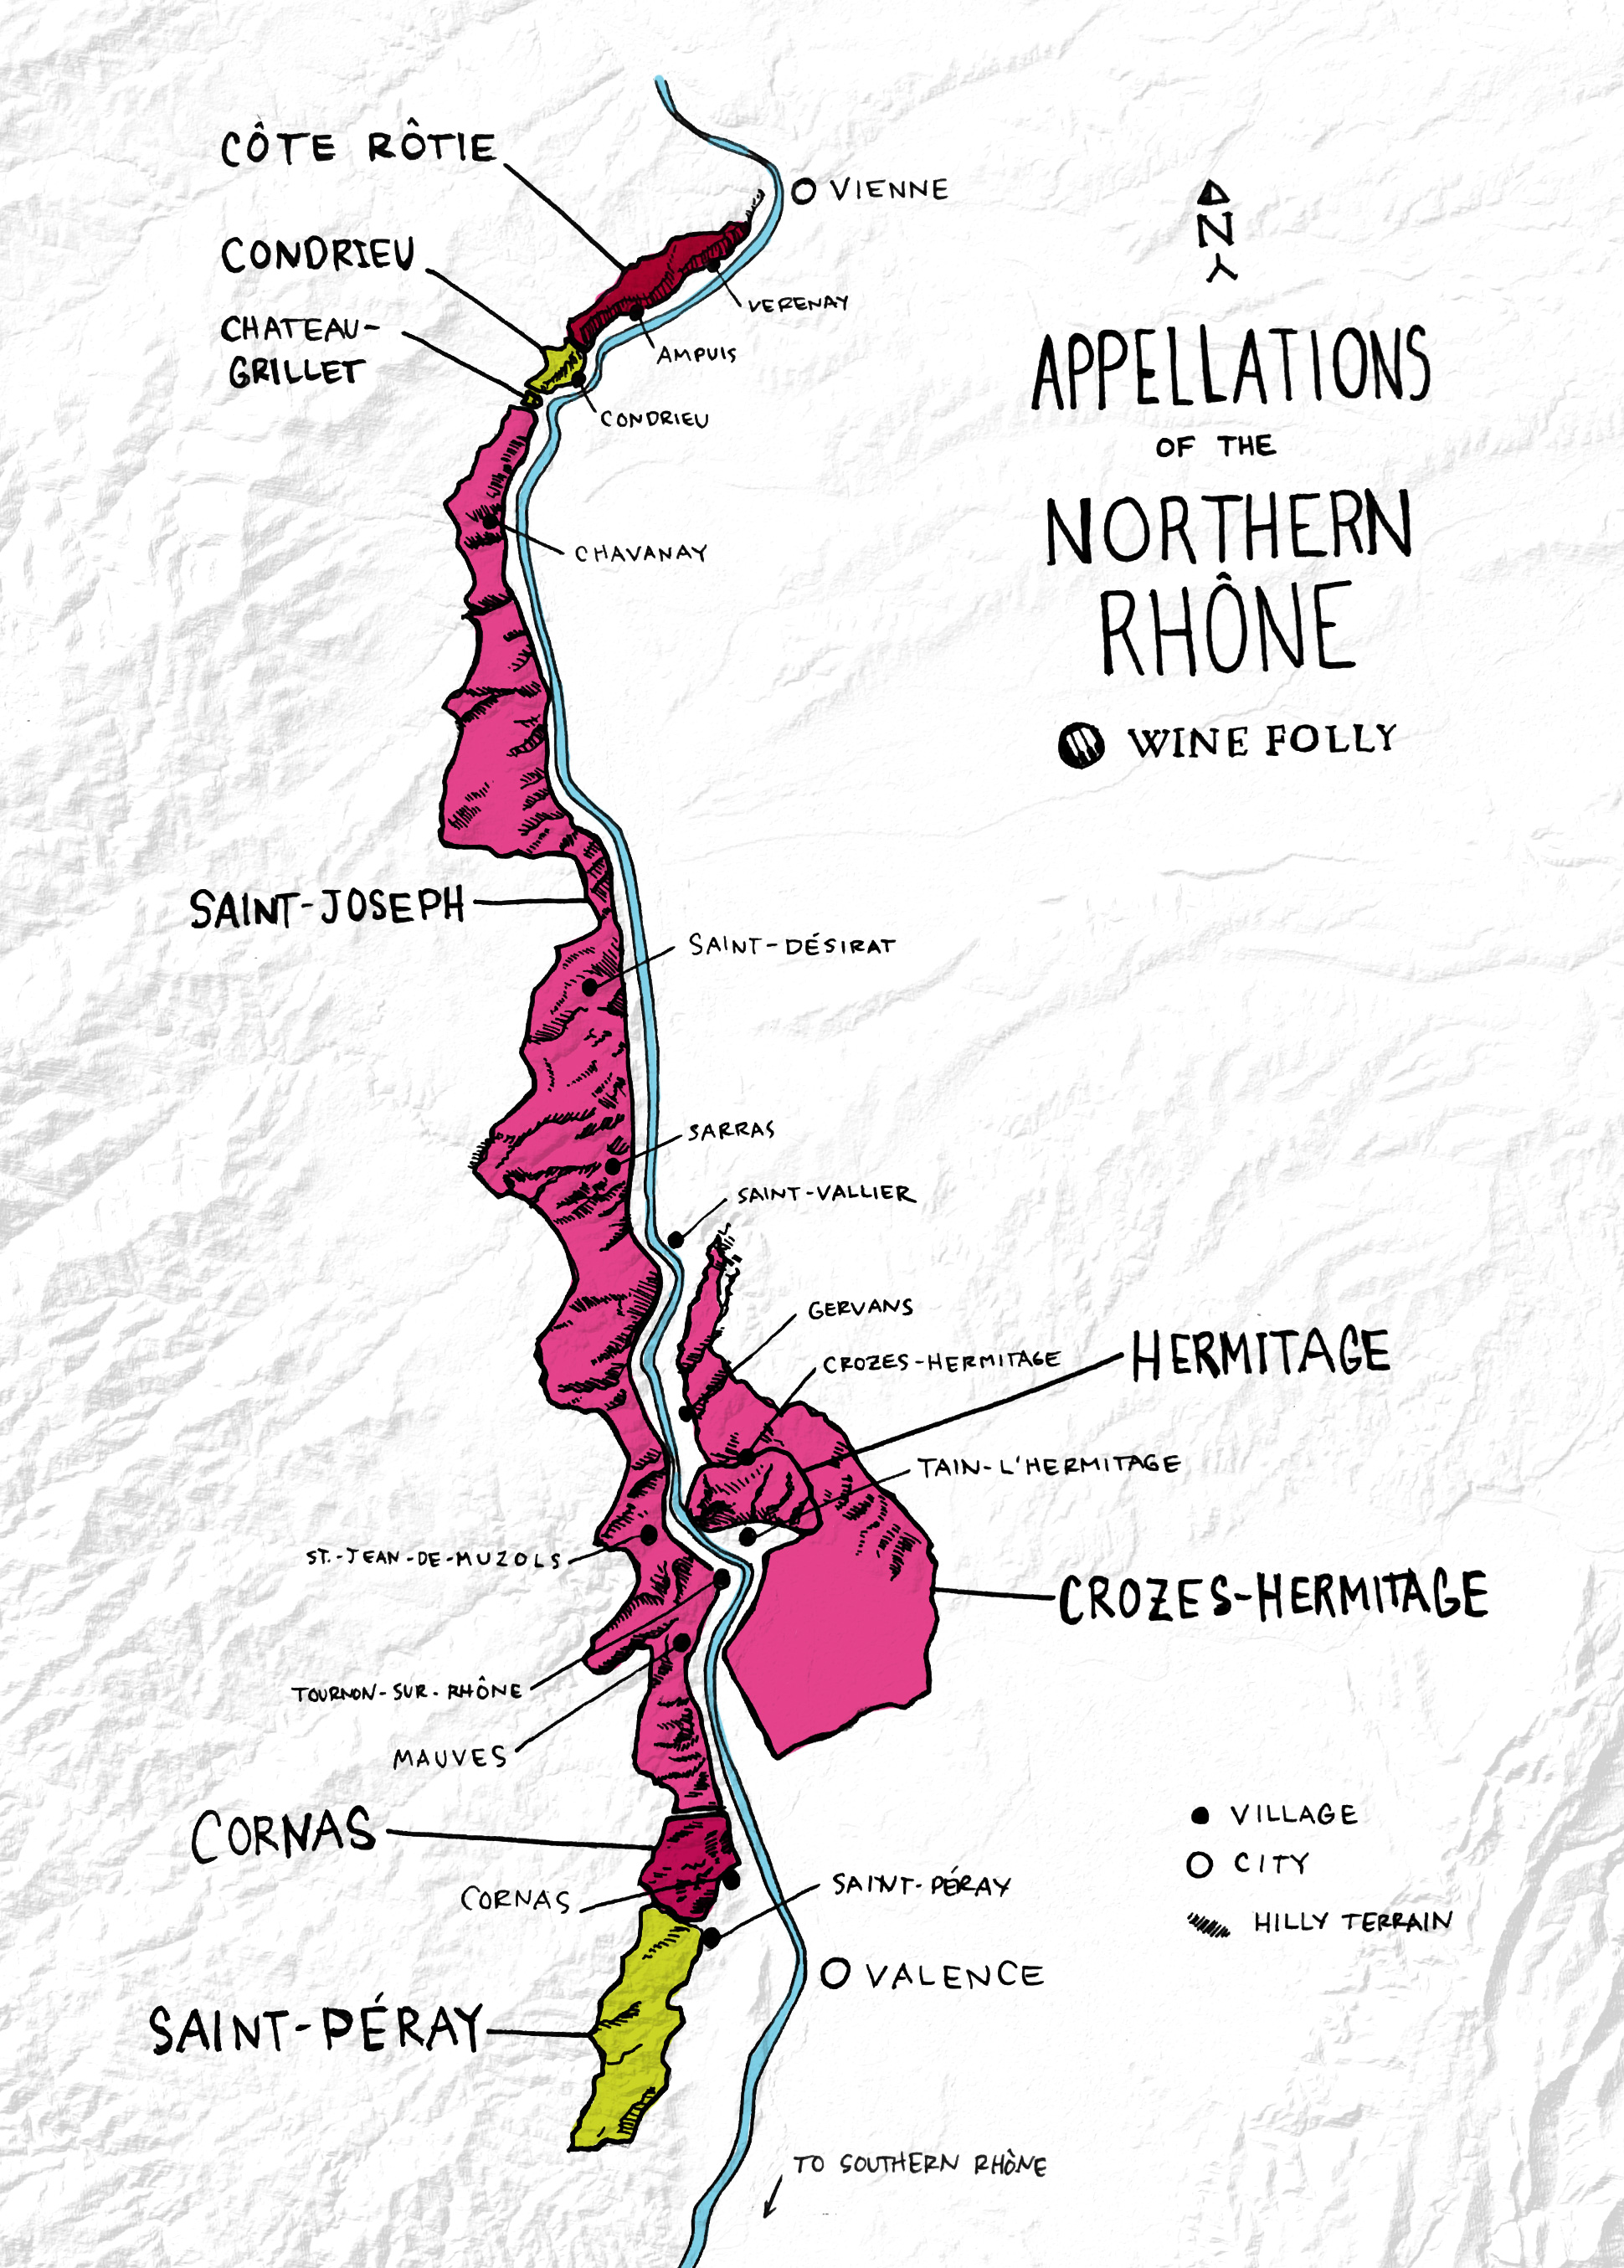 Map of the Northern Rhône showing appellations colored by what wines they produce.